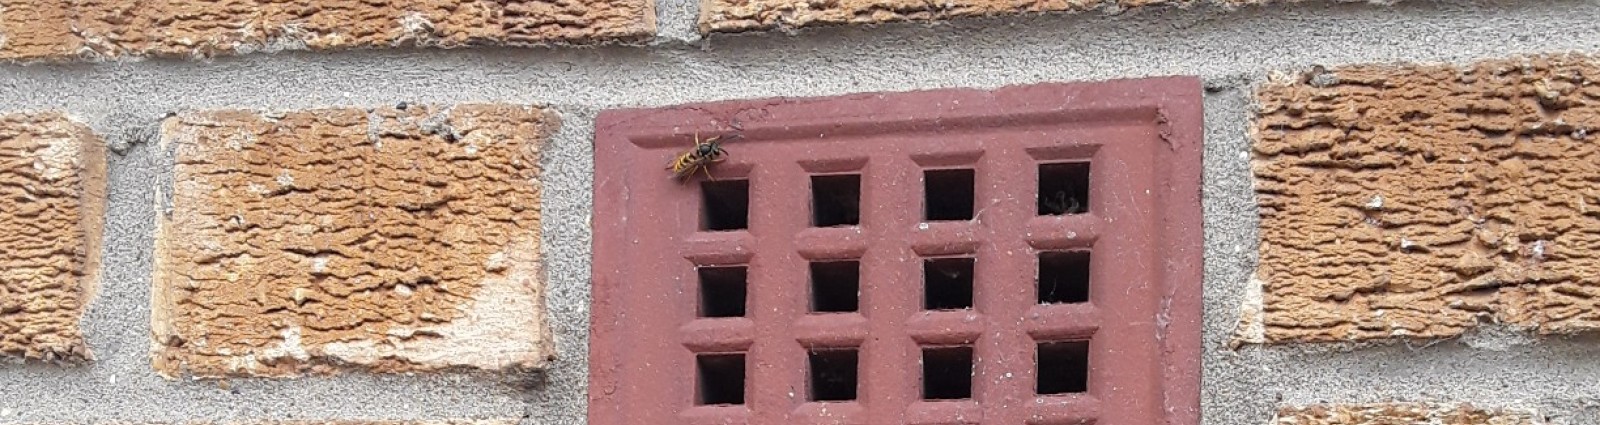 wasp on air vent v2